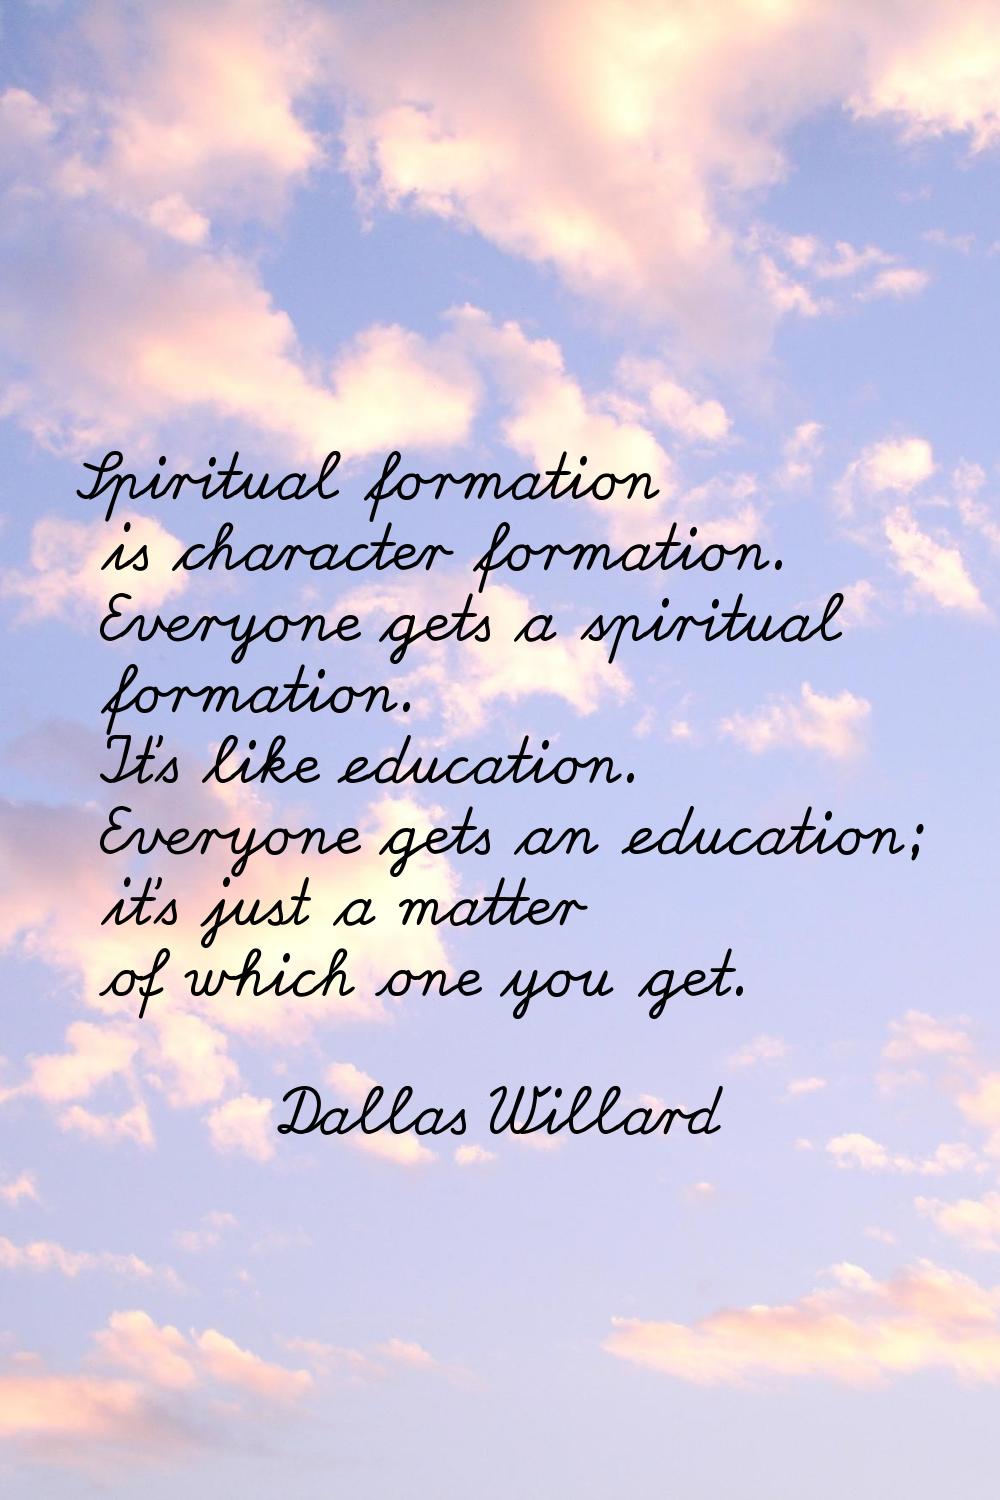 Spiritual formation is character formation. Everyone gets a spiritual formation. It's like educatio